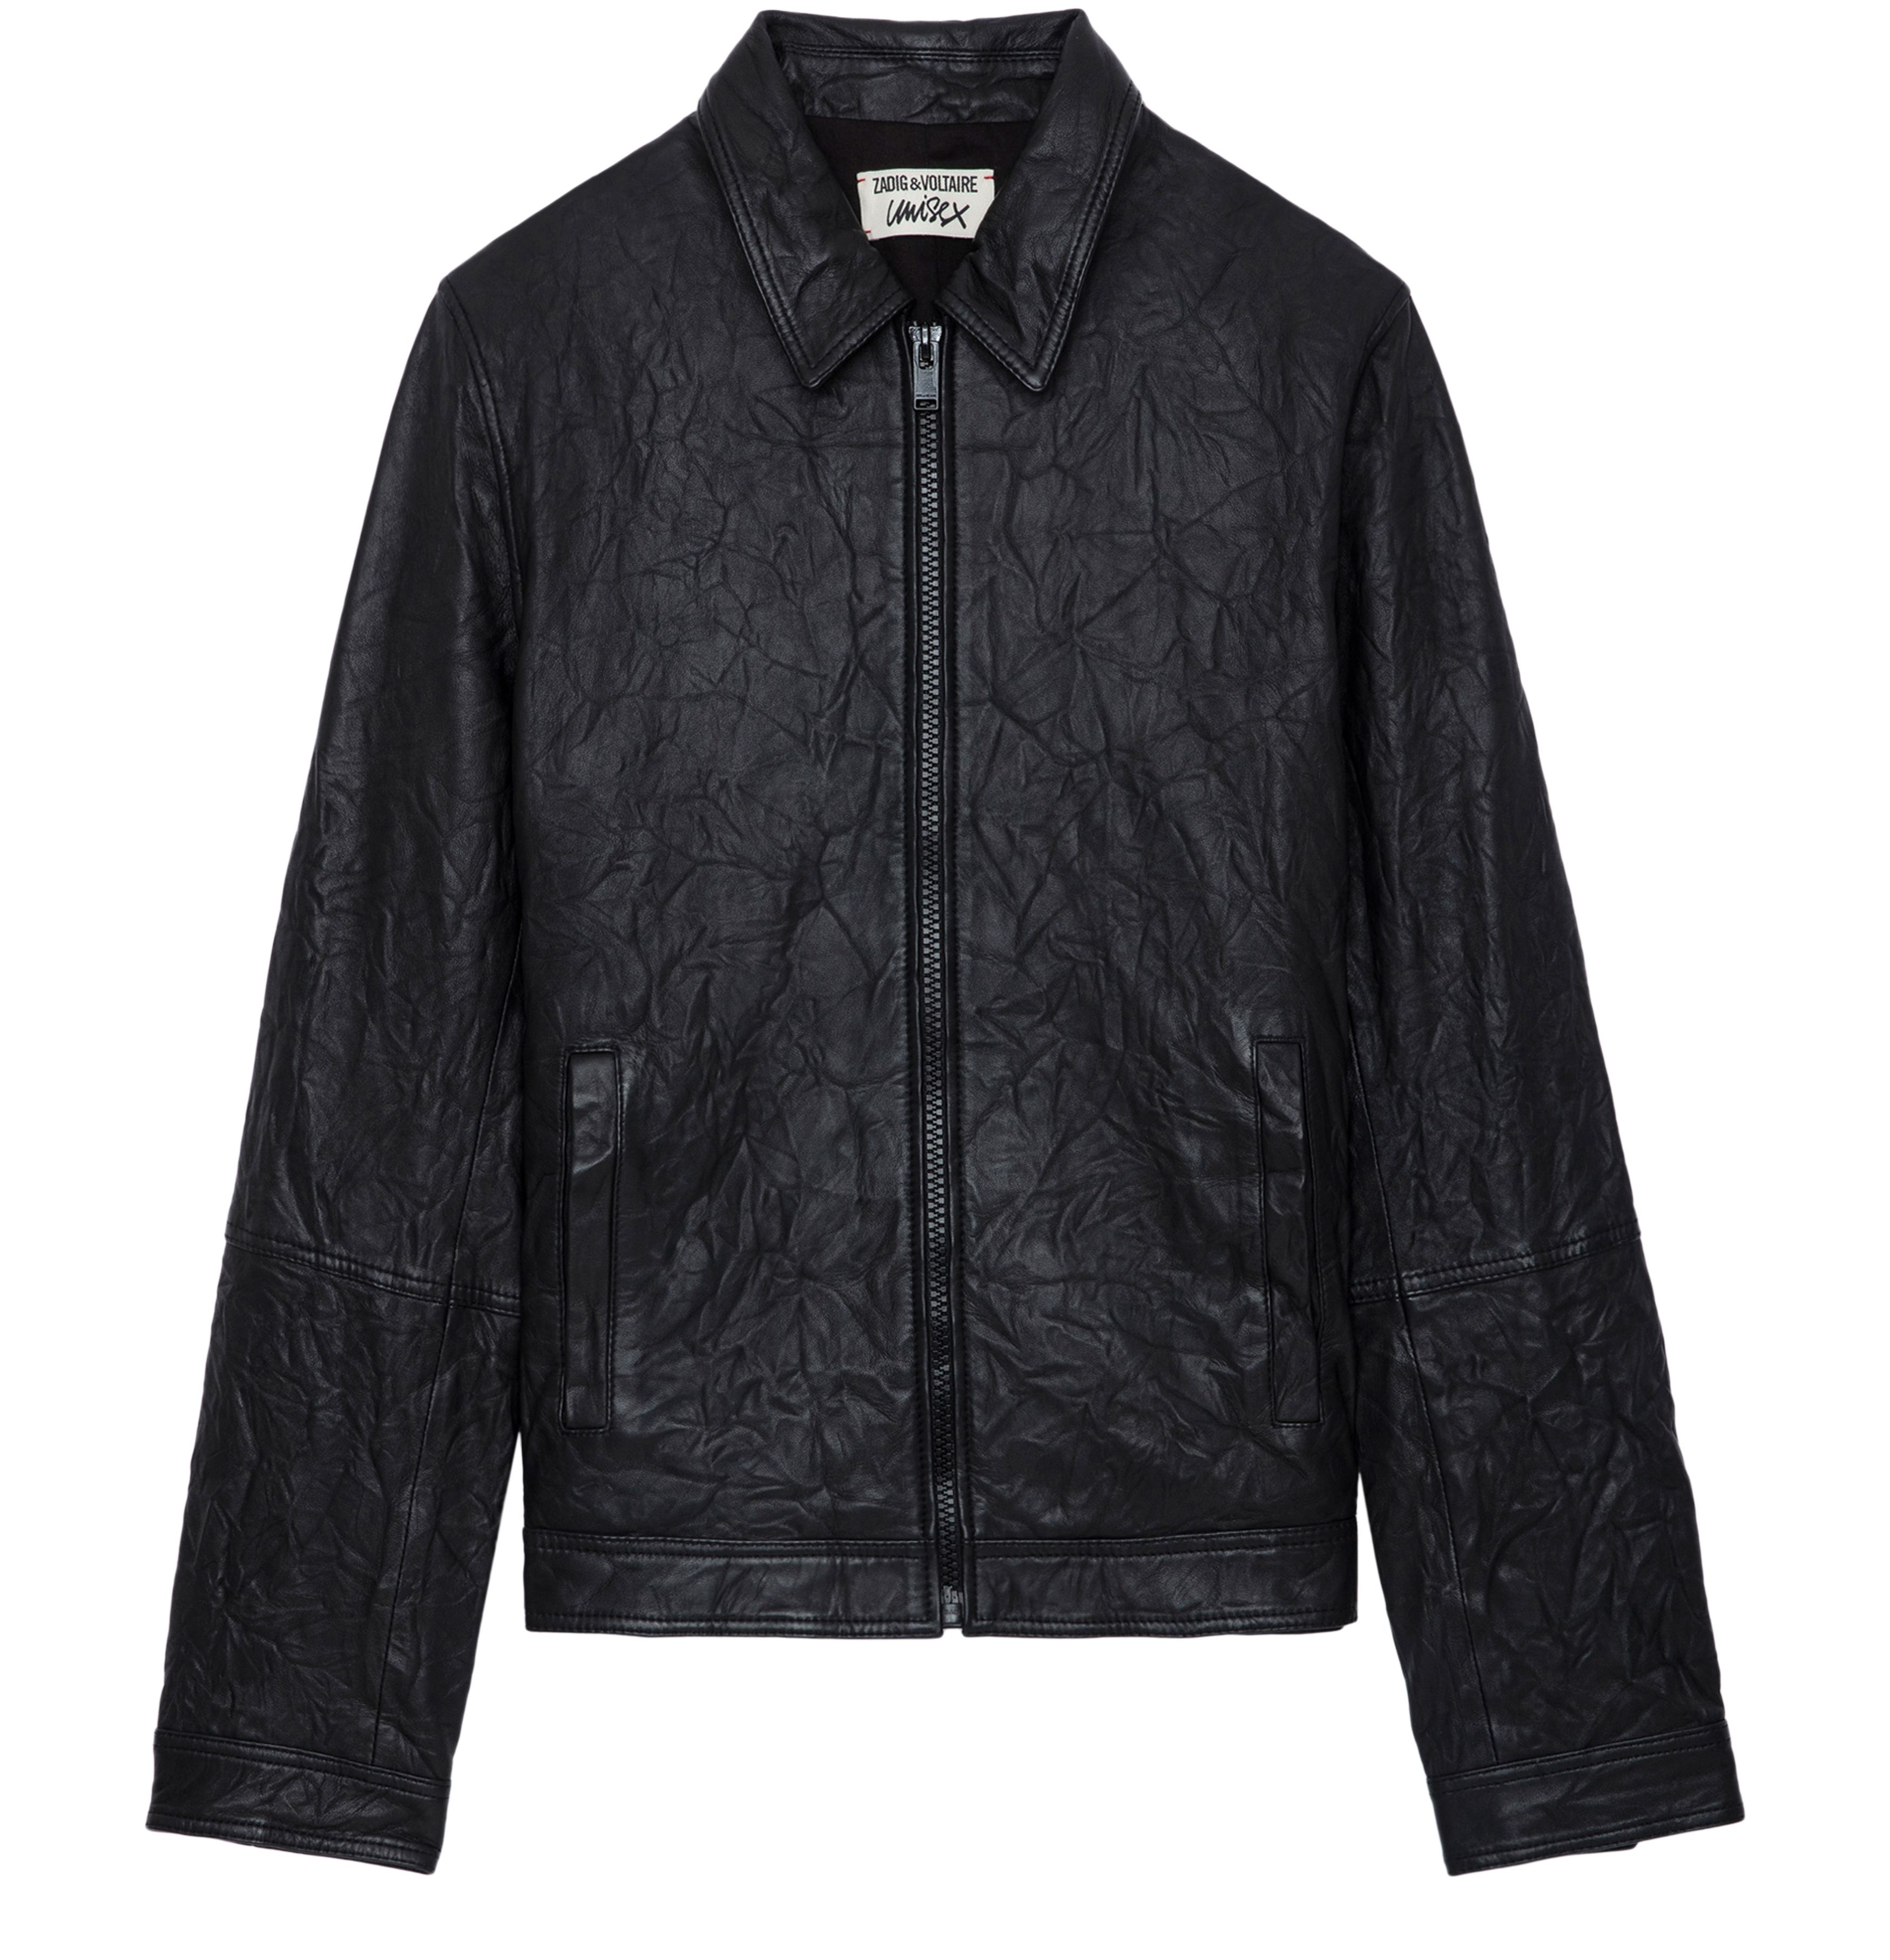 Zadig & Voltaire Lasso crinkled leather jacket